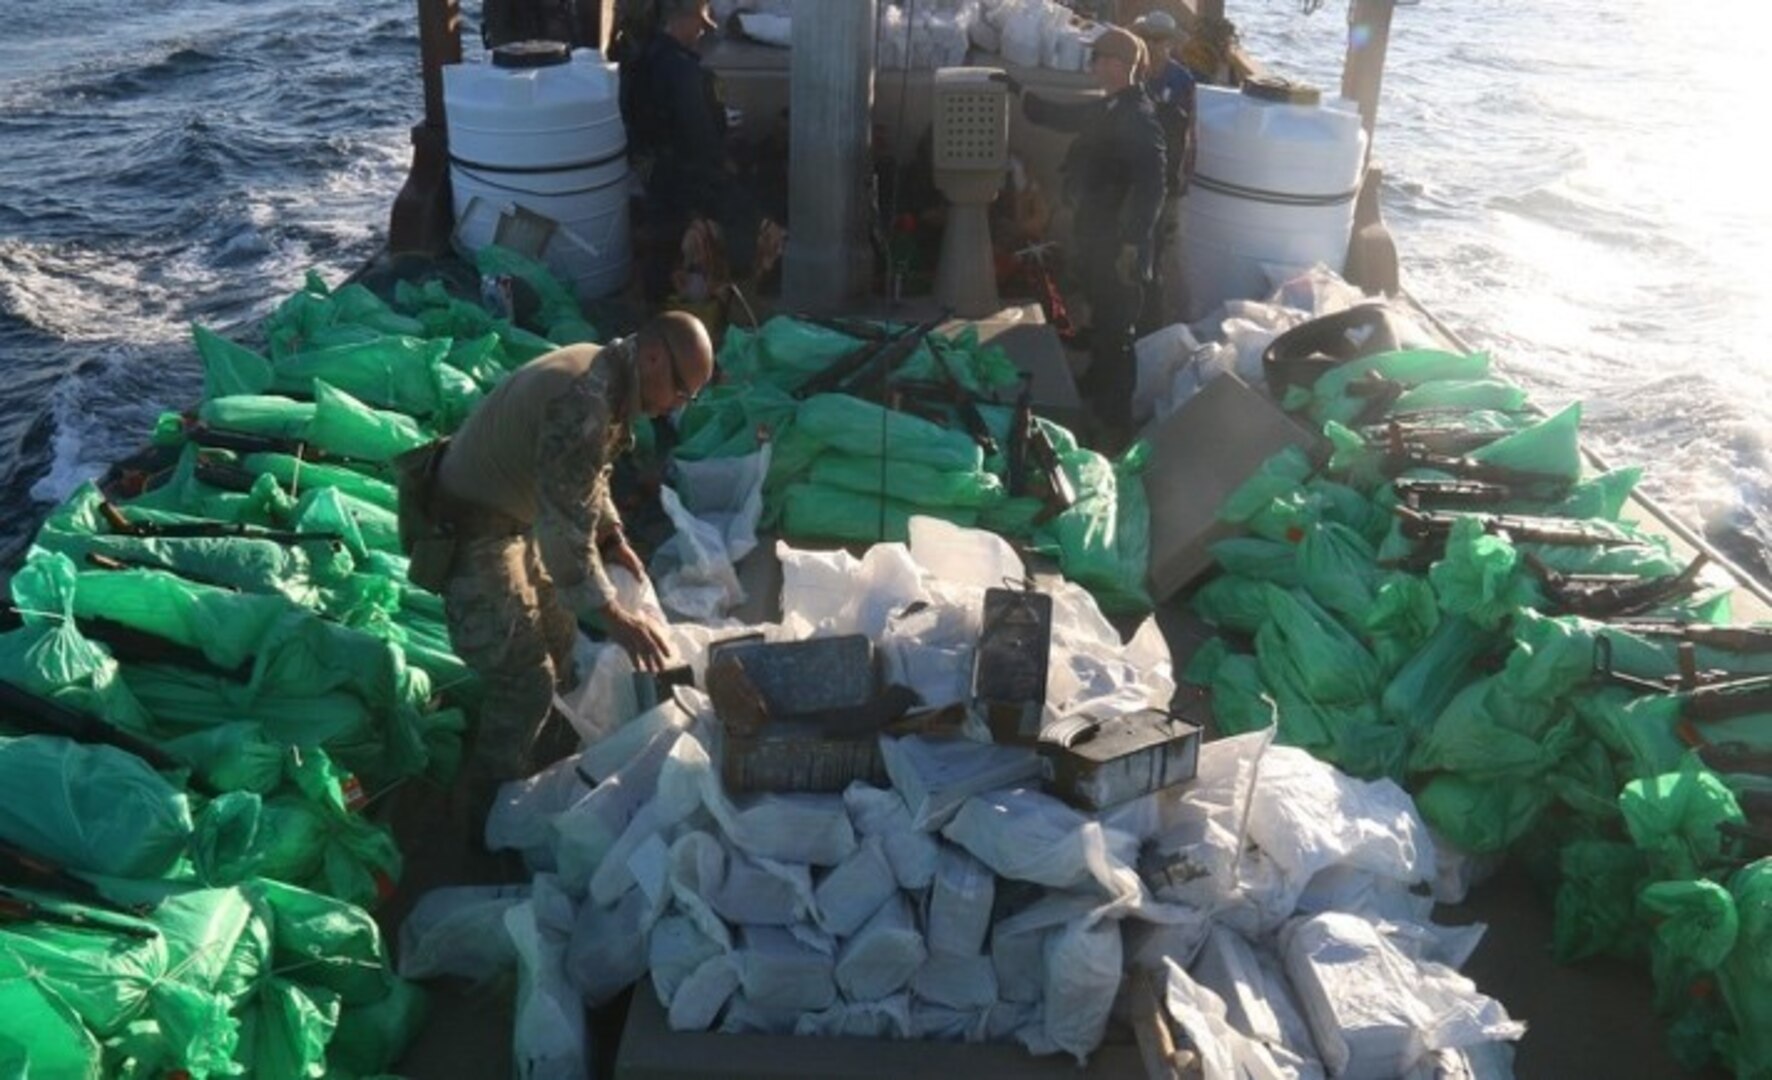 NORTH ARABIAN SEA - U.S. service members from patrol coastal ship USS Typhoon (PC 5) inventory an illicit shipment of weapons while aboard a stateless fishing vessel transiting international waters in the North Arabian Sea, Dec. 20, 2021.